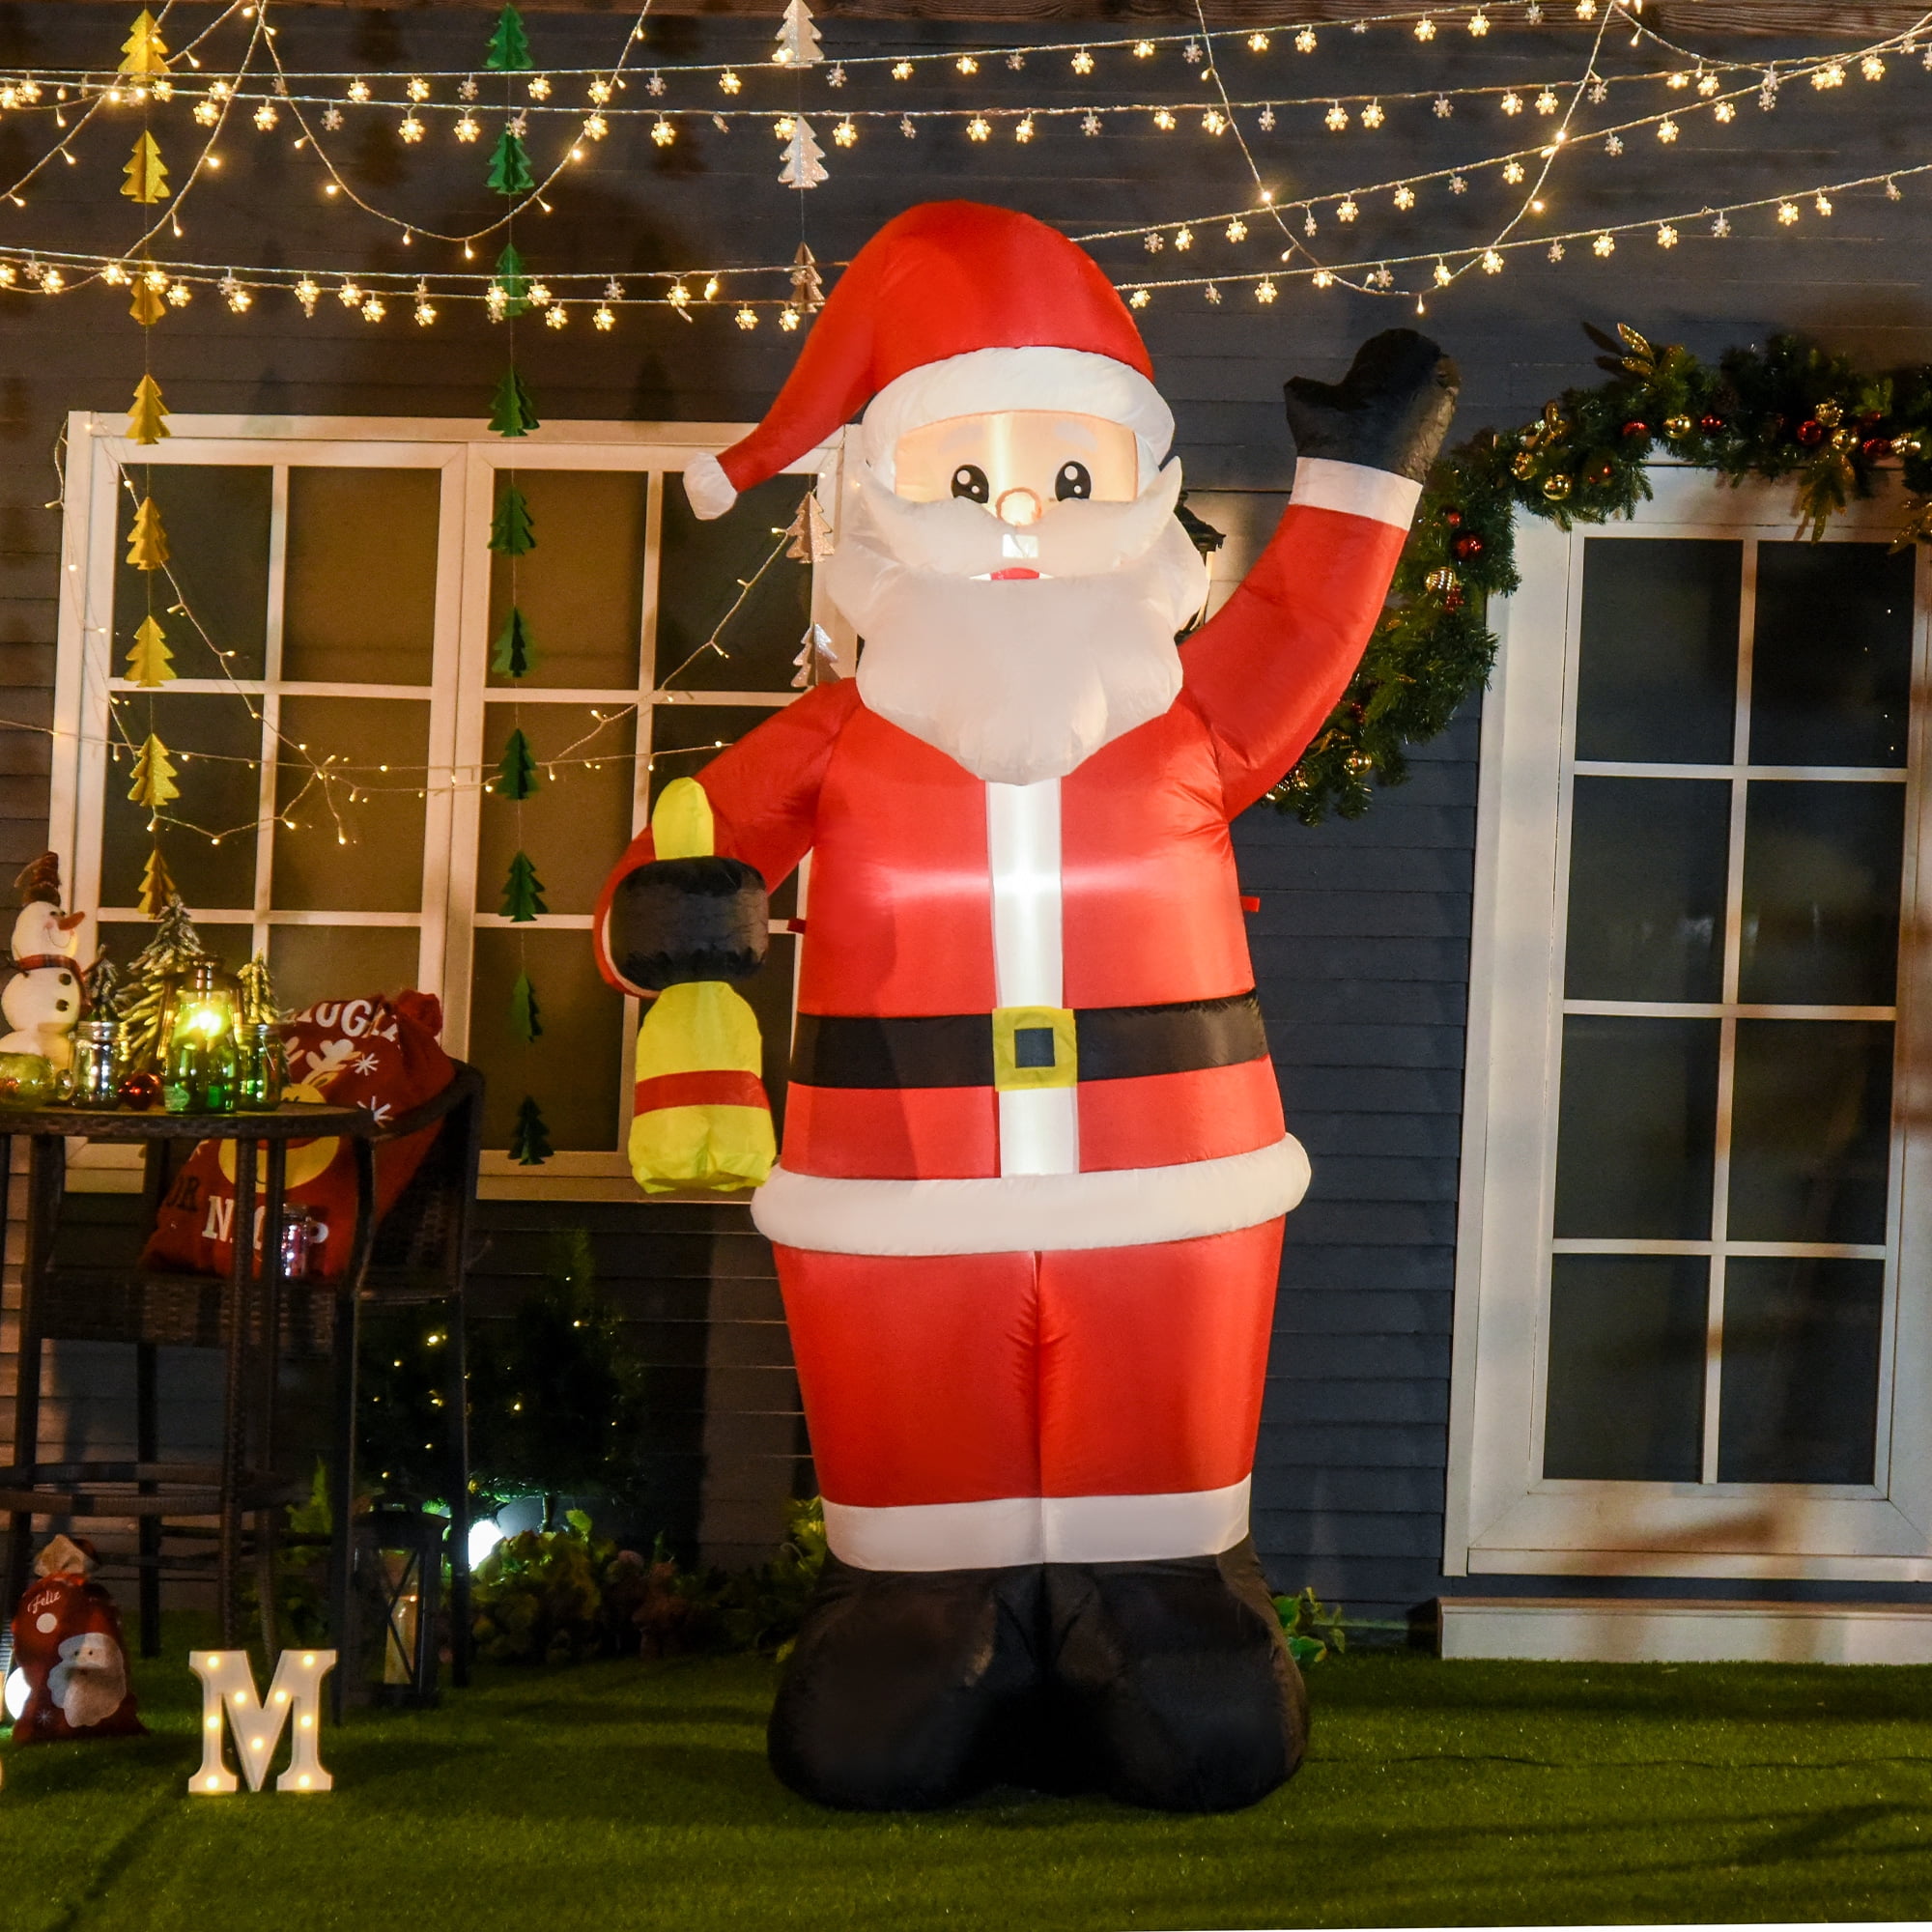 CHRISTMAS BY HOLIDAY LIVING 4' LIGHTED SANTA CLAUS INFLATABLE BLOWUP BRAND NEW! 